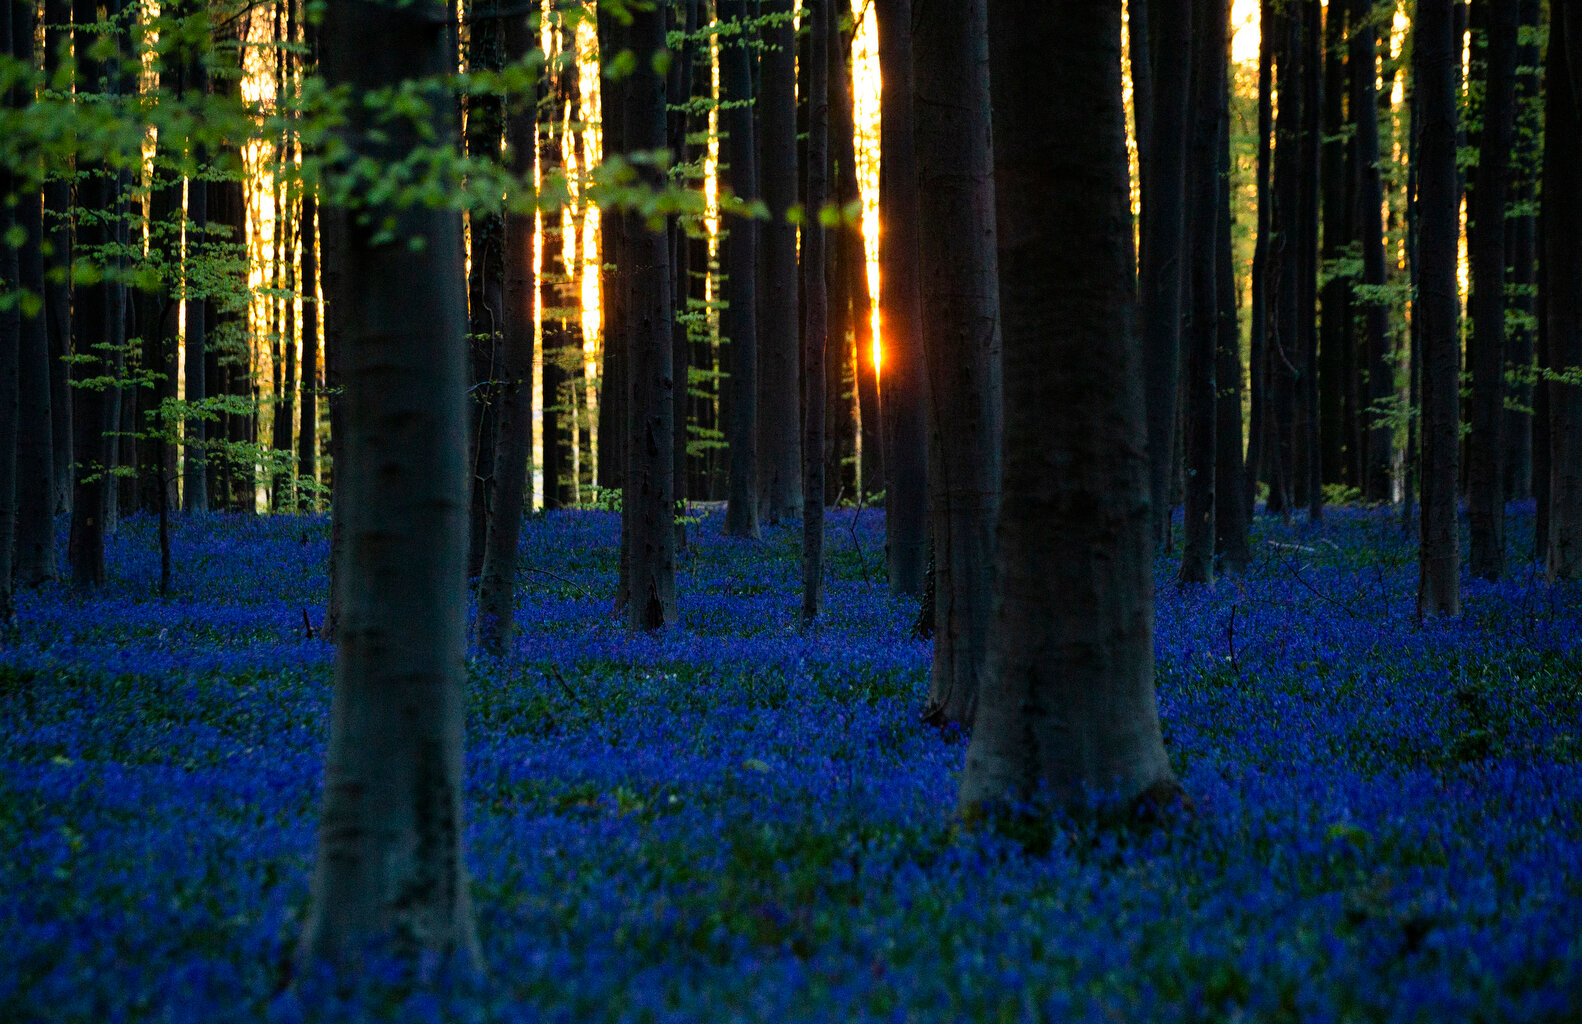  The sun begins to rise through trees as Bluebells, also known as wild Hyacinth, bloom in the Hallerbos forest in Halle, Belgium, on Thursday, April 16, 2020. (AP Photo/Virginia Mayo) 